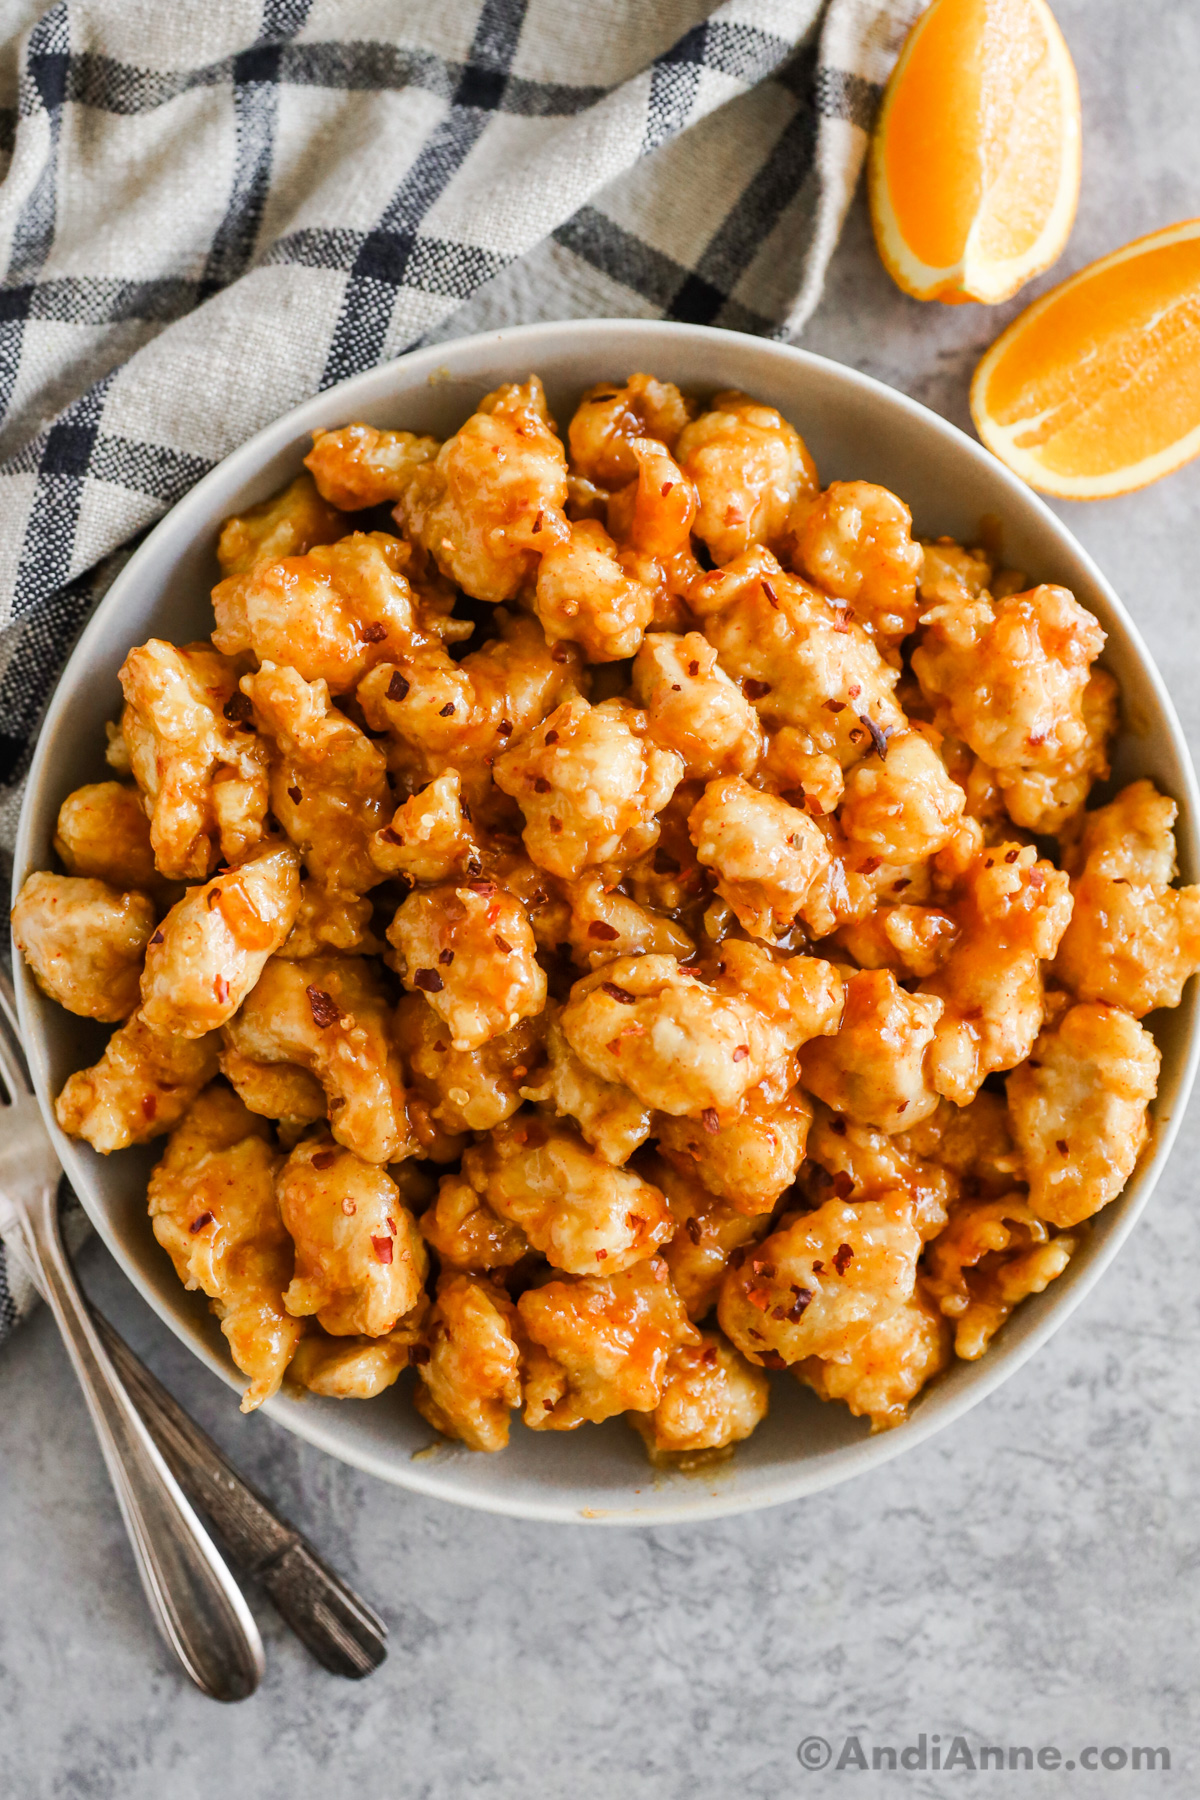 A plate of orange chicken bites covered in sauce and sprinkled with red pepper flakes.